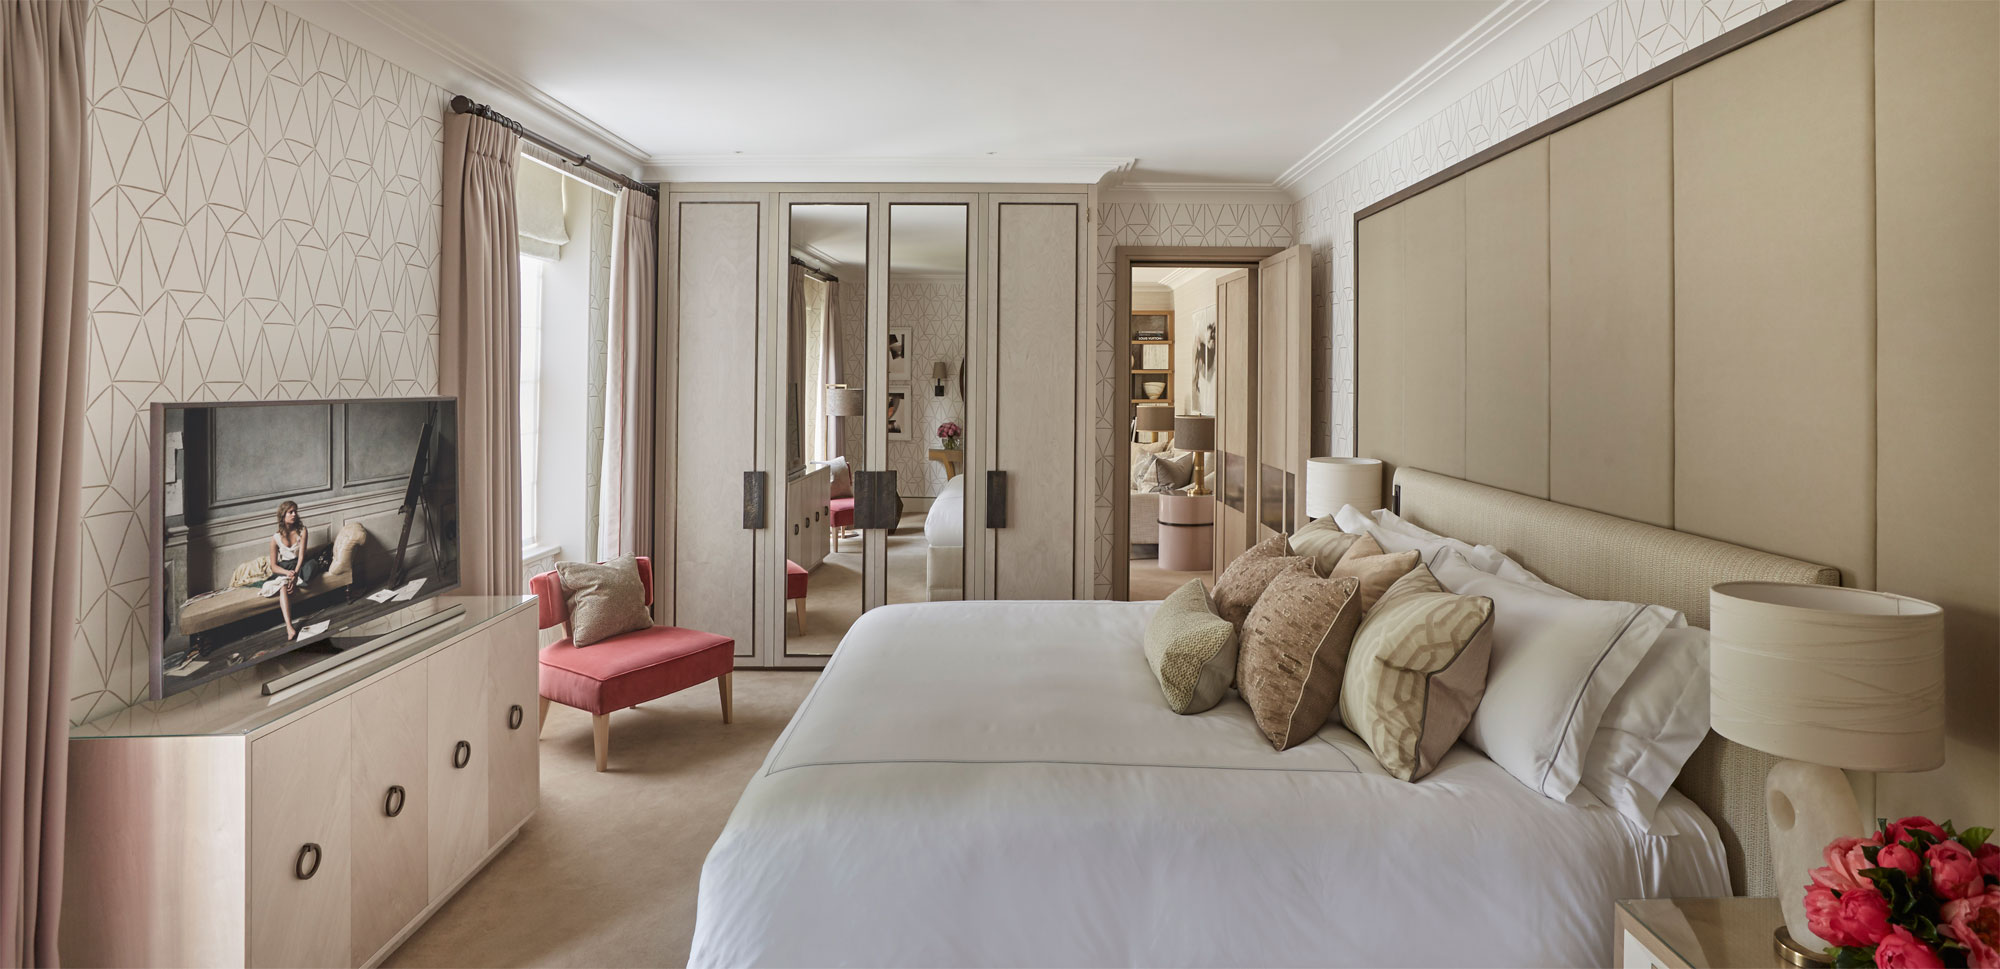 Décor Inspiration | A Suite at the Berkeley Hotel London by Helen Green Design